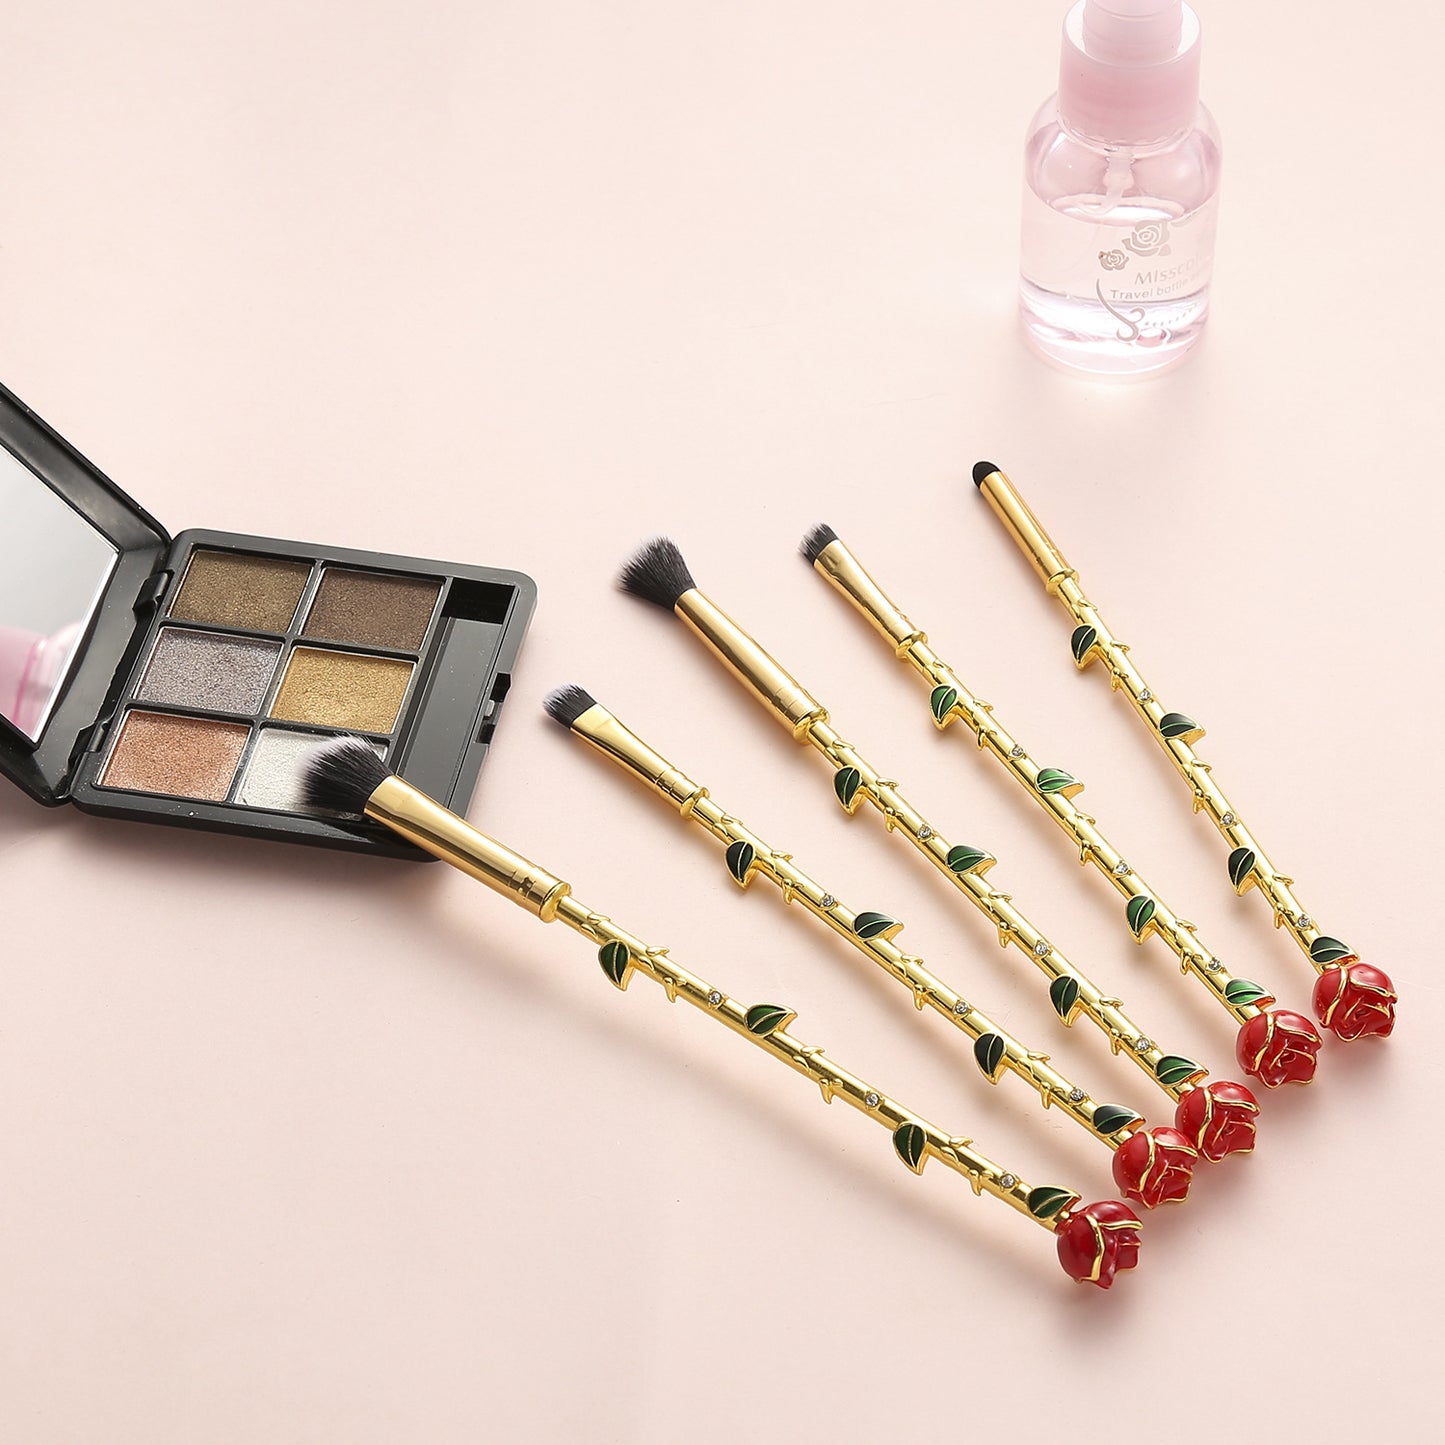 Midi Fox Rose Makeup Brush Tool Little Prince Around Beauty and the Beast Valentine's Day Gift - B&H